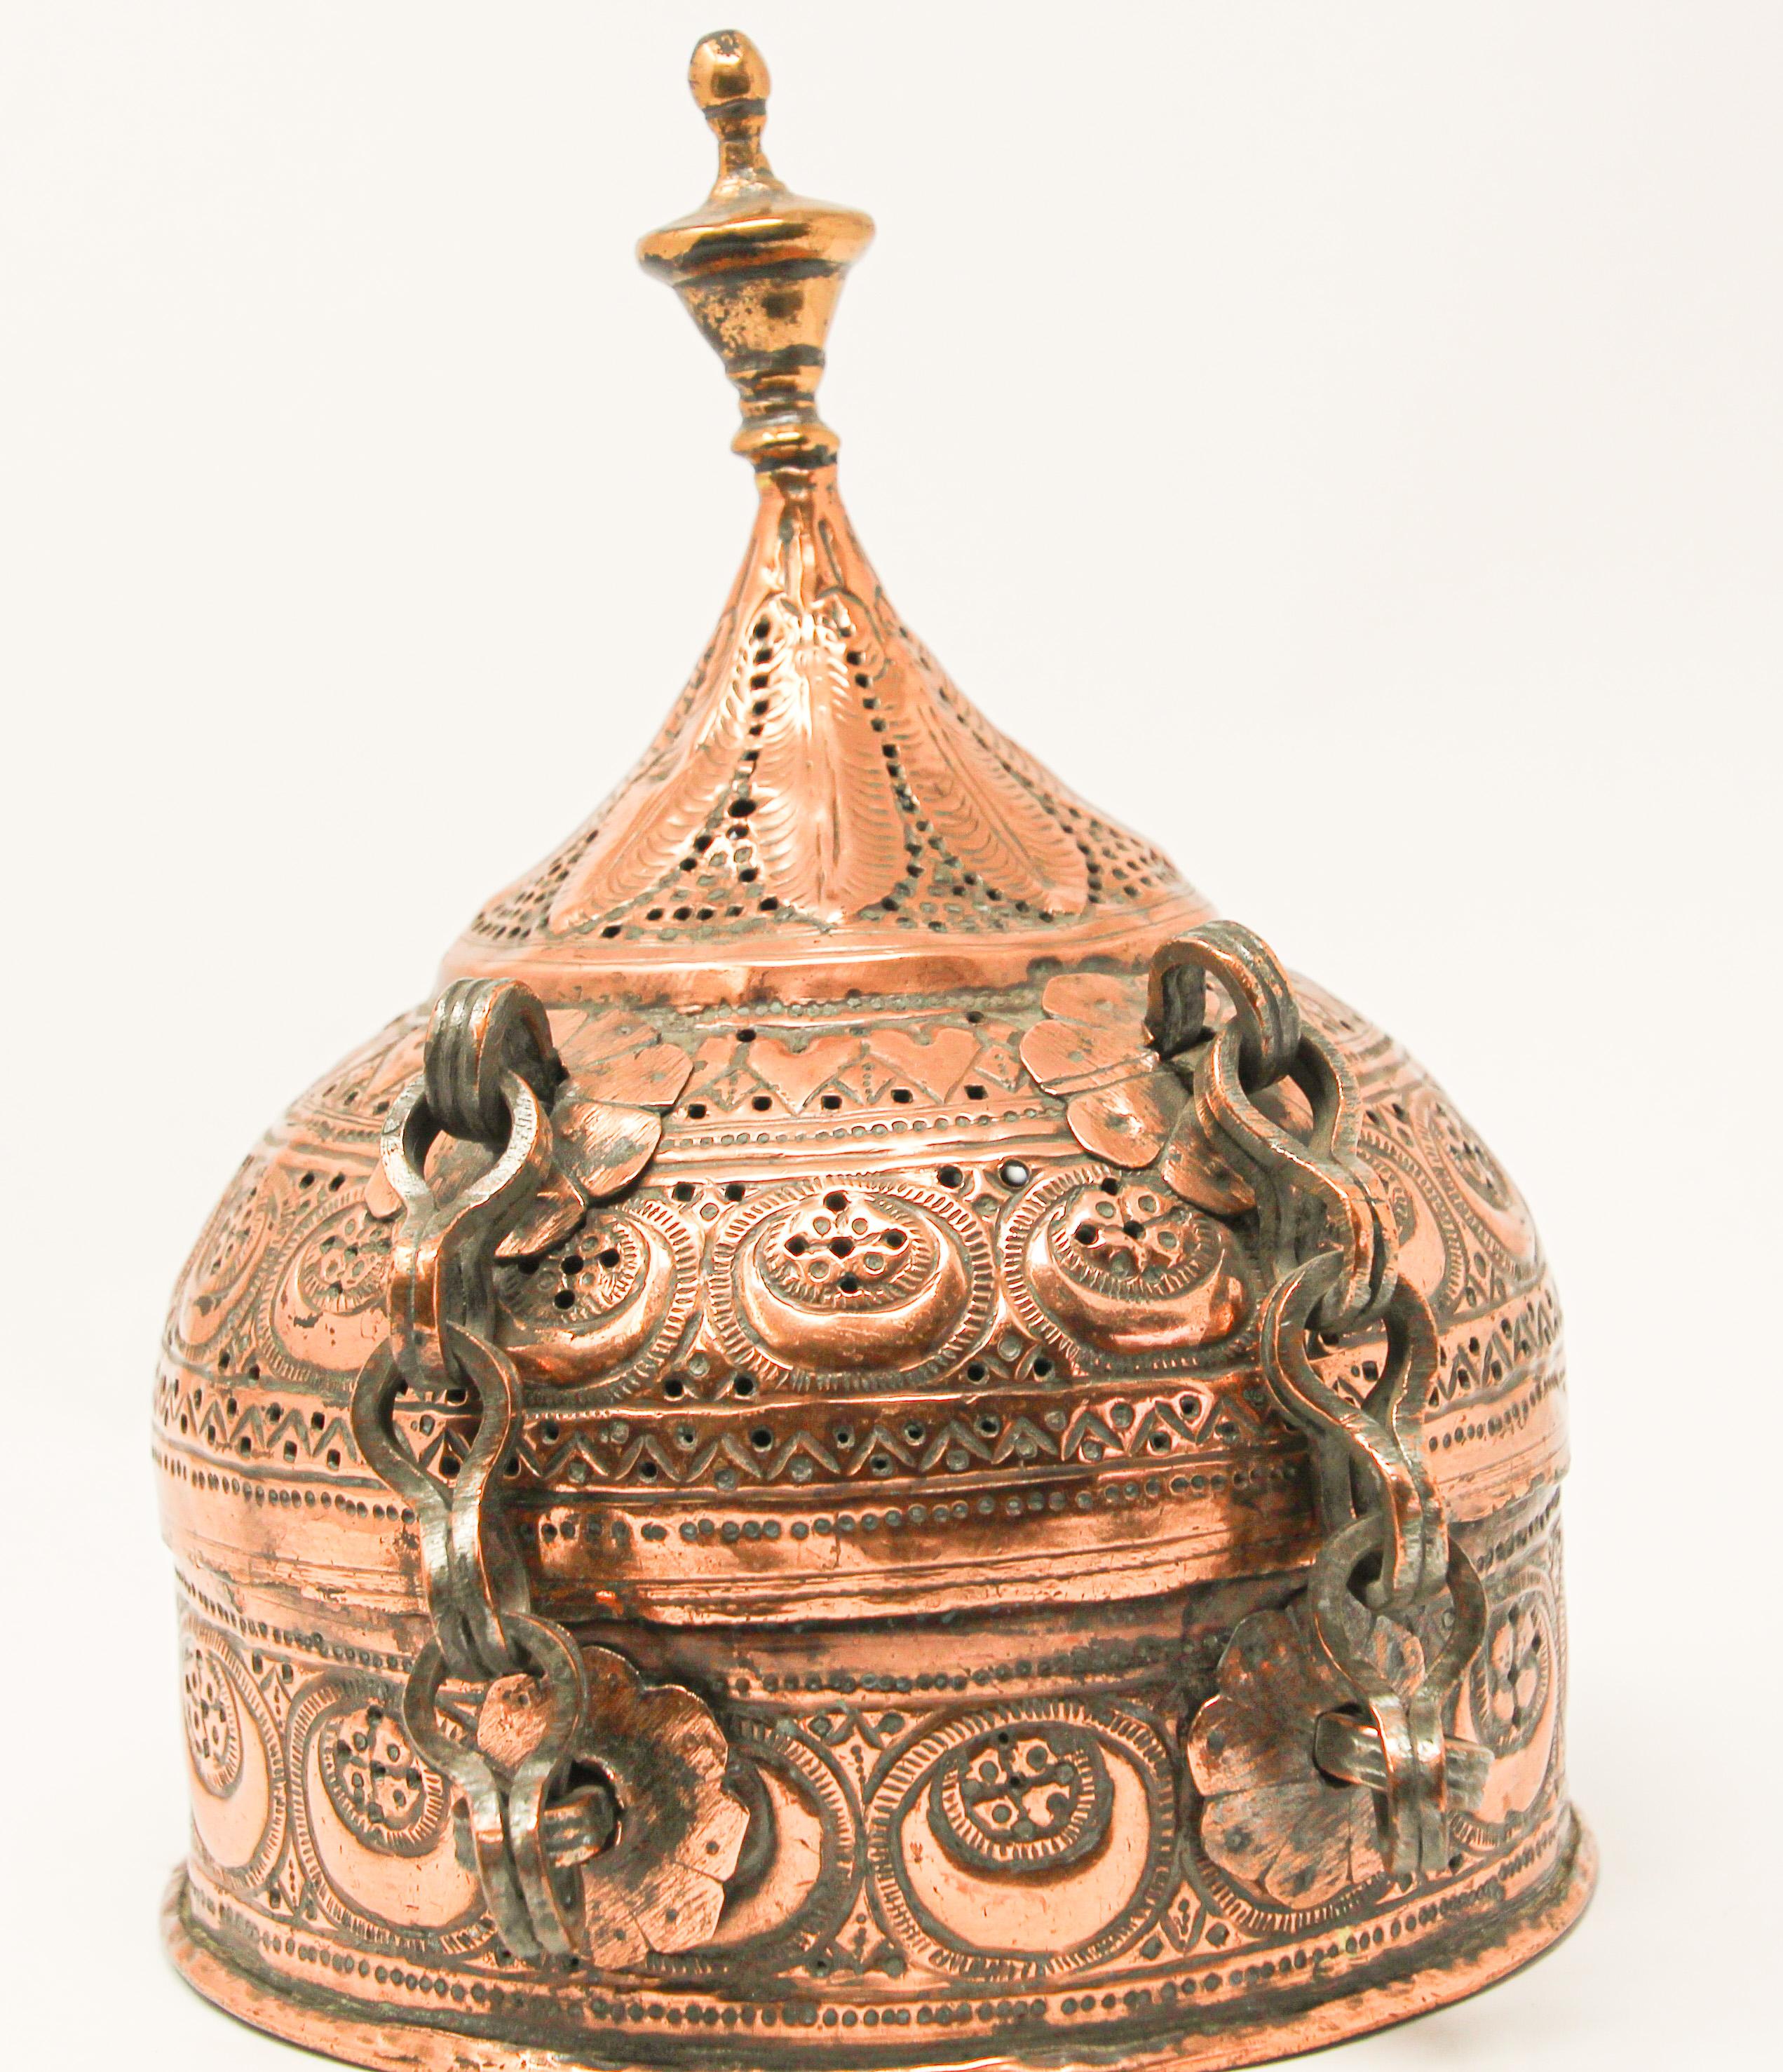 Indian Rajasthani Mughal Decorative Copper Lidded Betel Spice Pandan Caddy Box For Sale